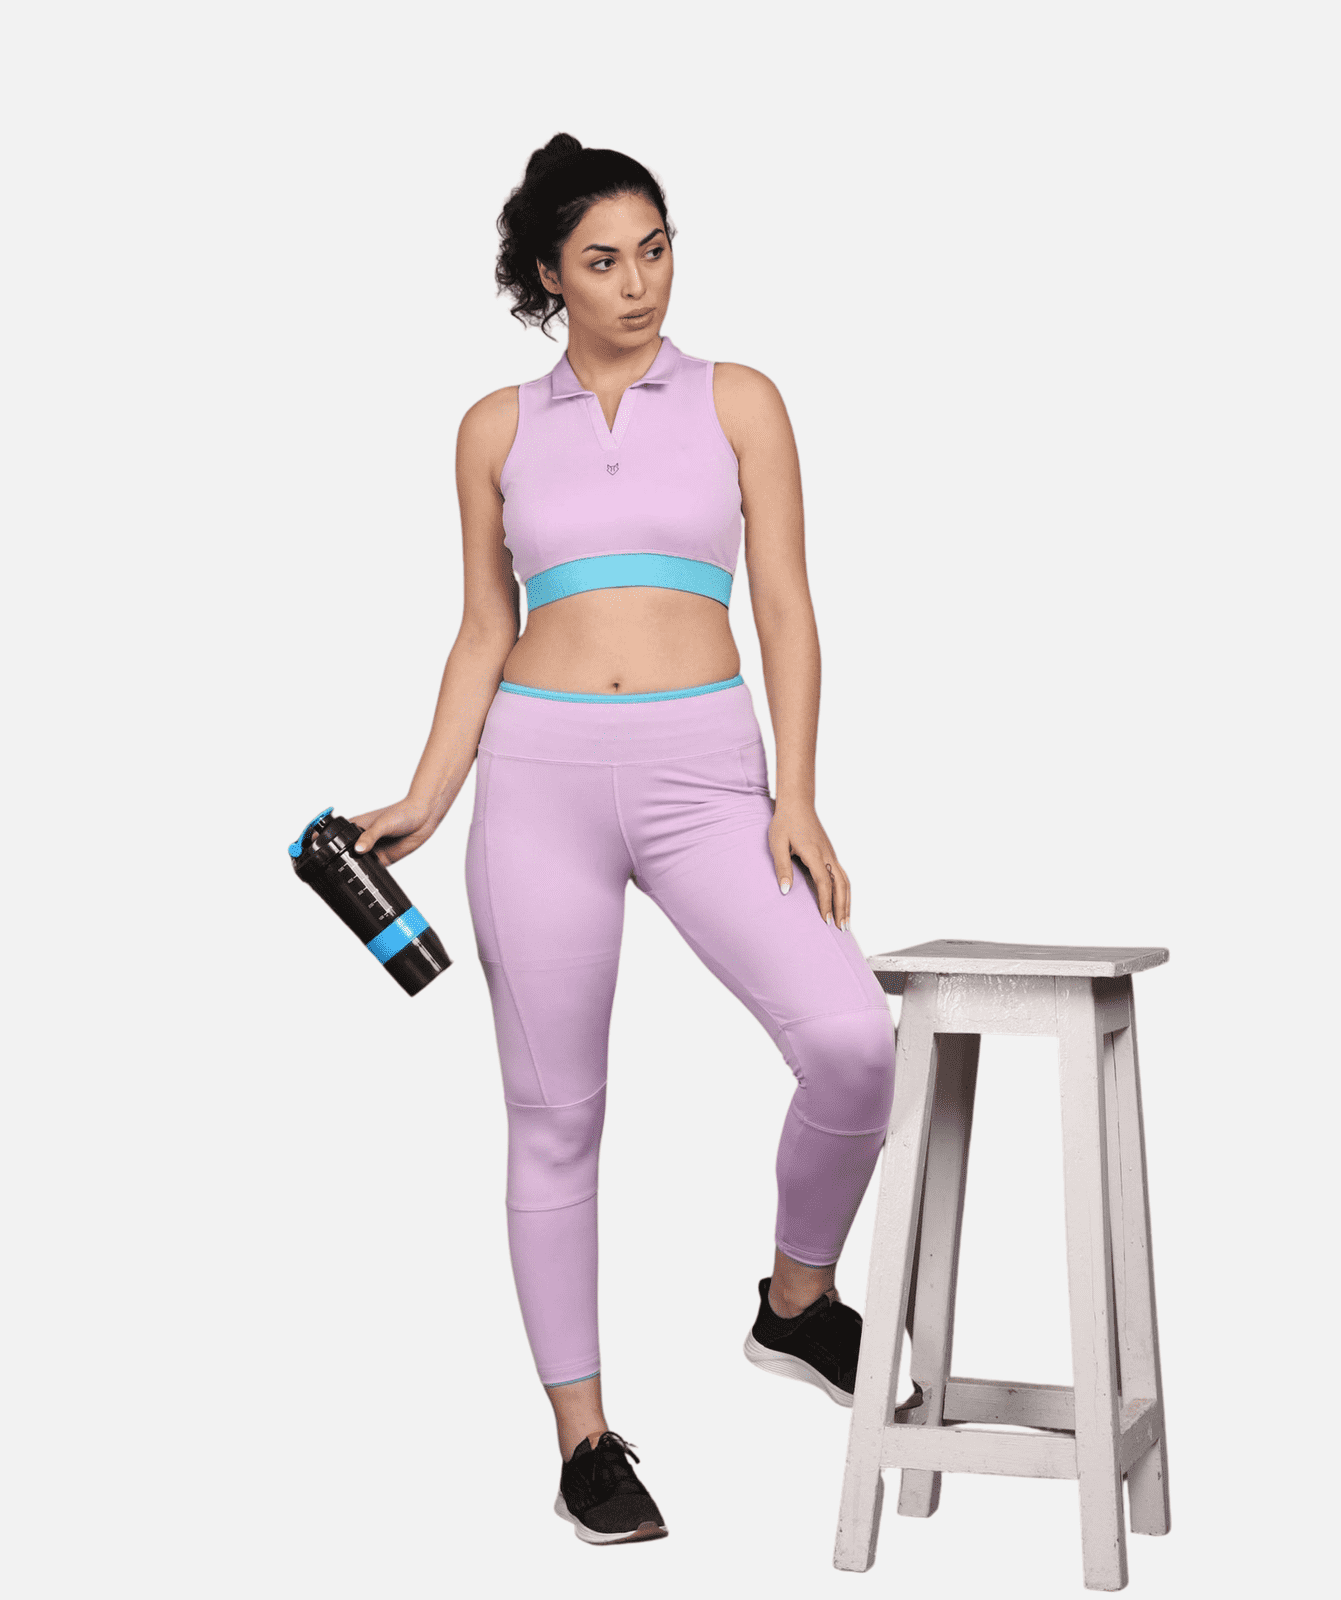 Yoga Set Top and Pants for Women | Full Flexibility | Bright and attractive Top and Bottom Set